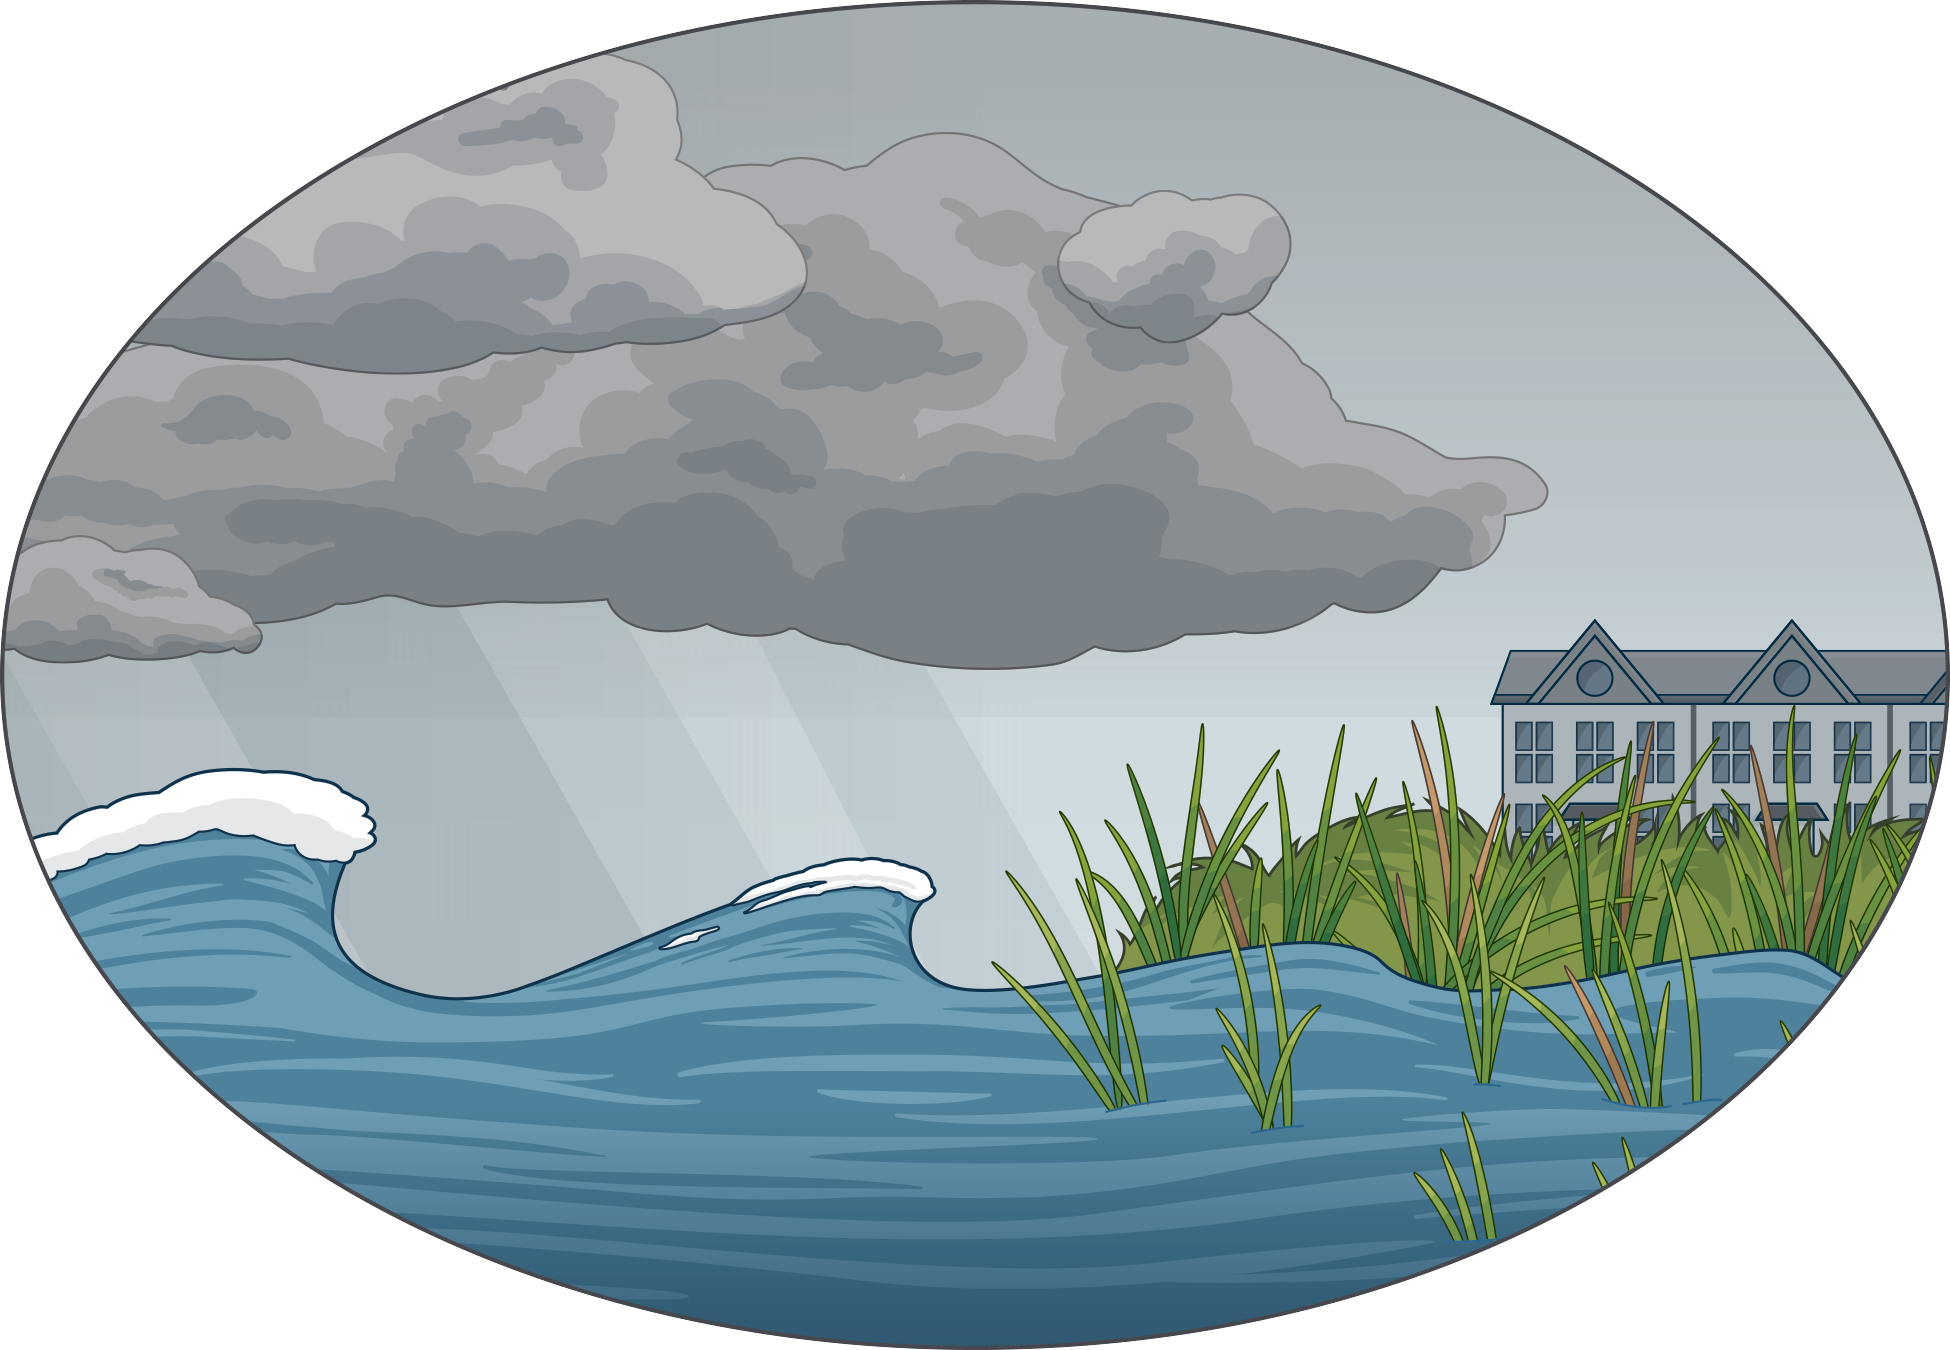 An illustration of storm clouds and large waves about to crash on a house.